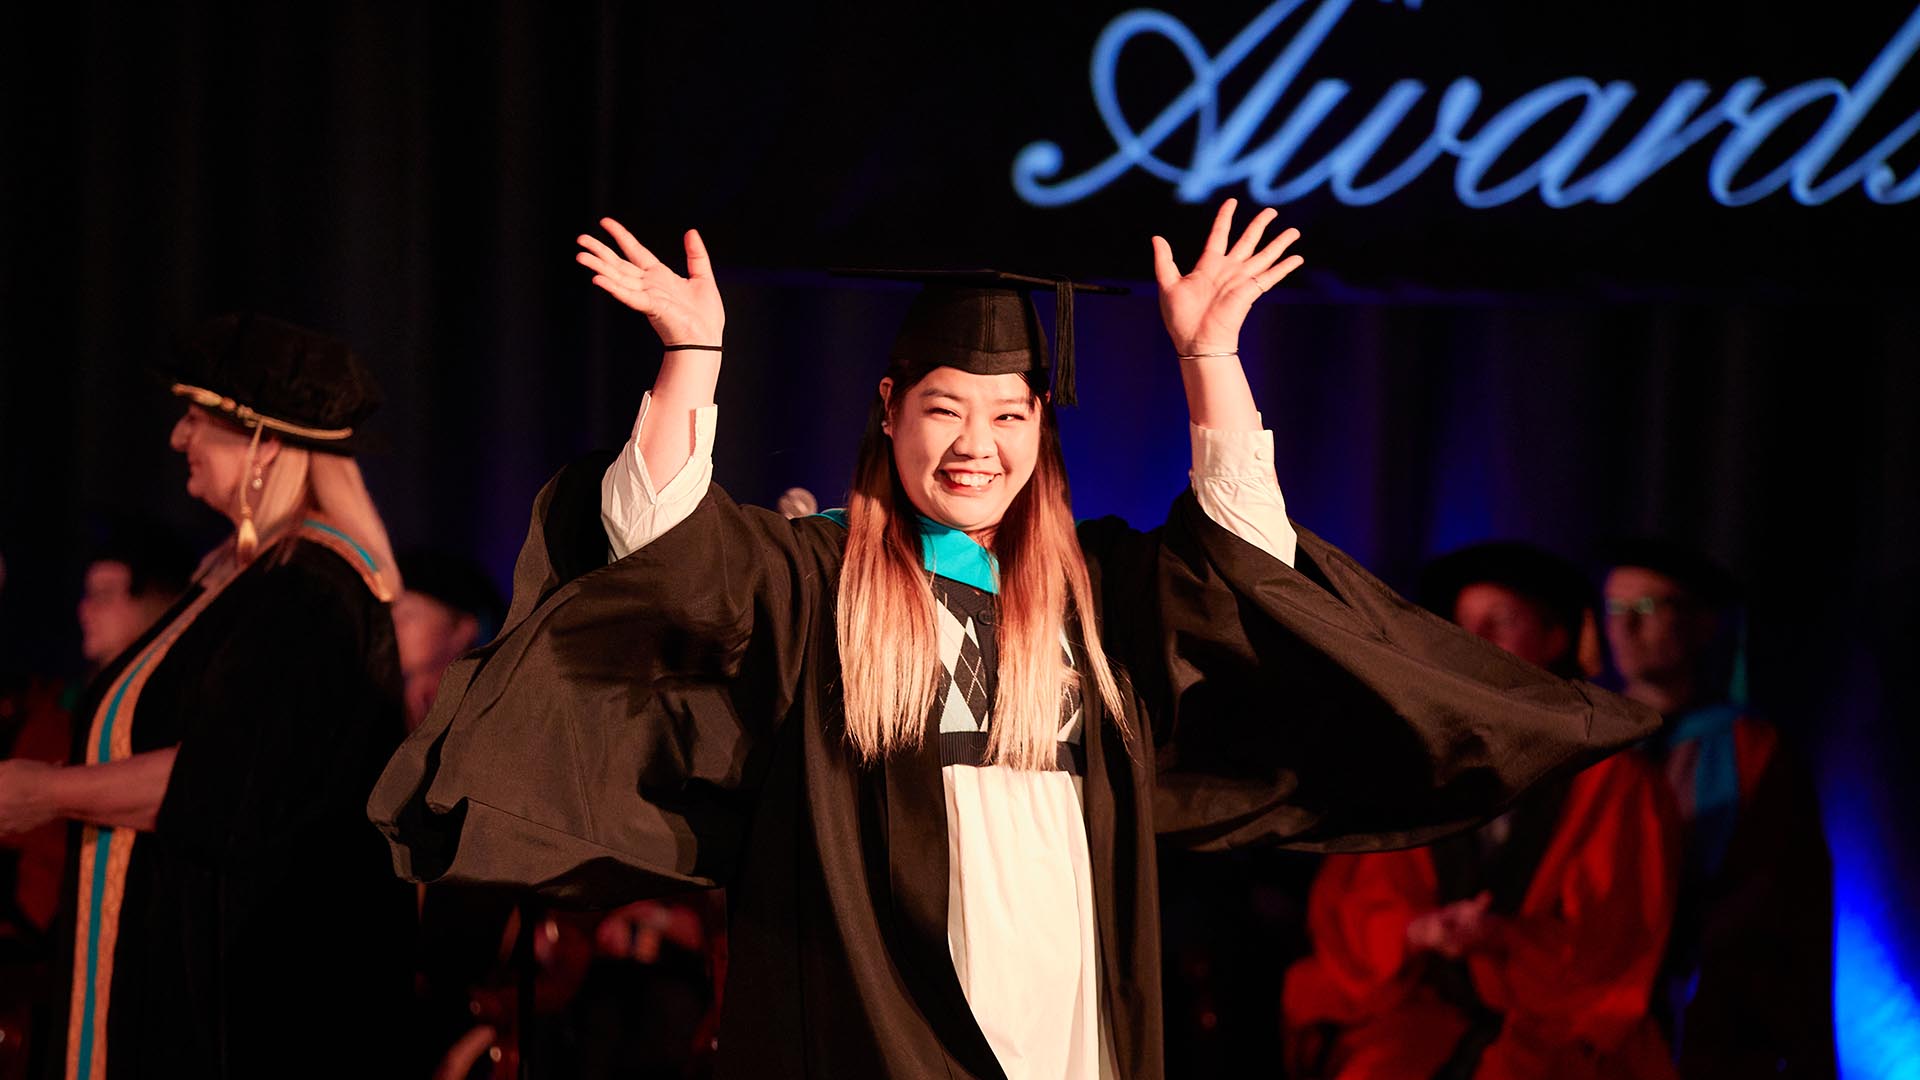 A student celebrates getting her degree by waving her hands wackily